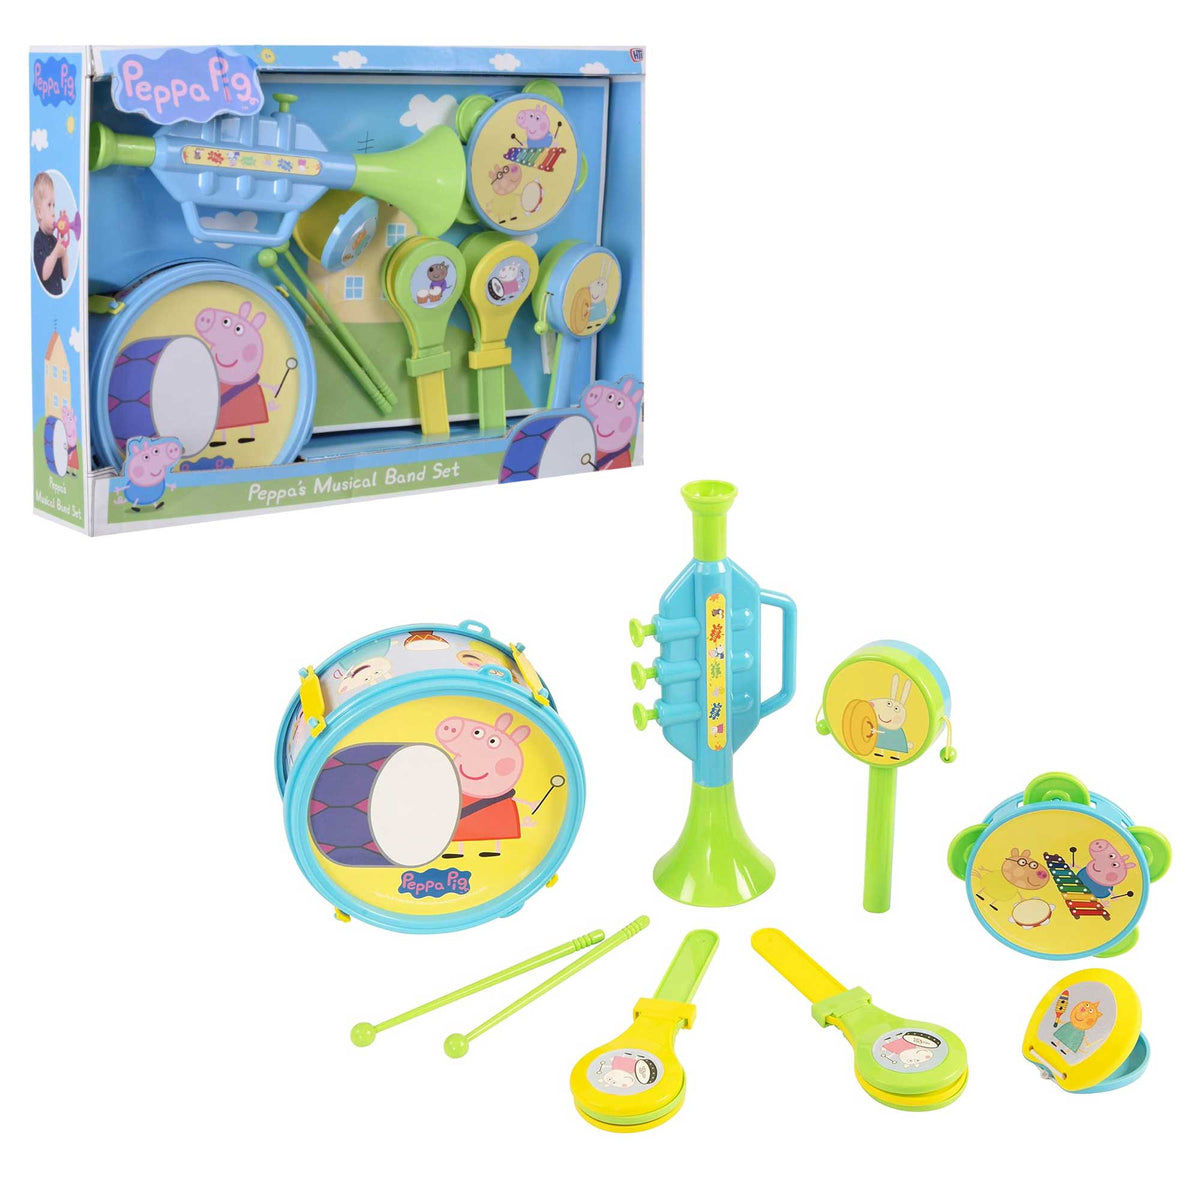 peppa pig musical toy, musical toy for children , musical playset for kids , peppa pig playset, music toys, interactive toys, kids case, kids music toys, nickelodeon toys , kids maracas, peppa pig, george pig, mummy pig, daddy pig musical instruments